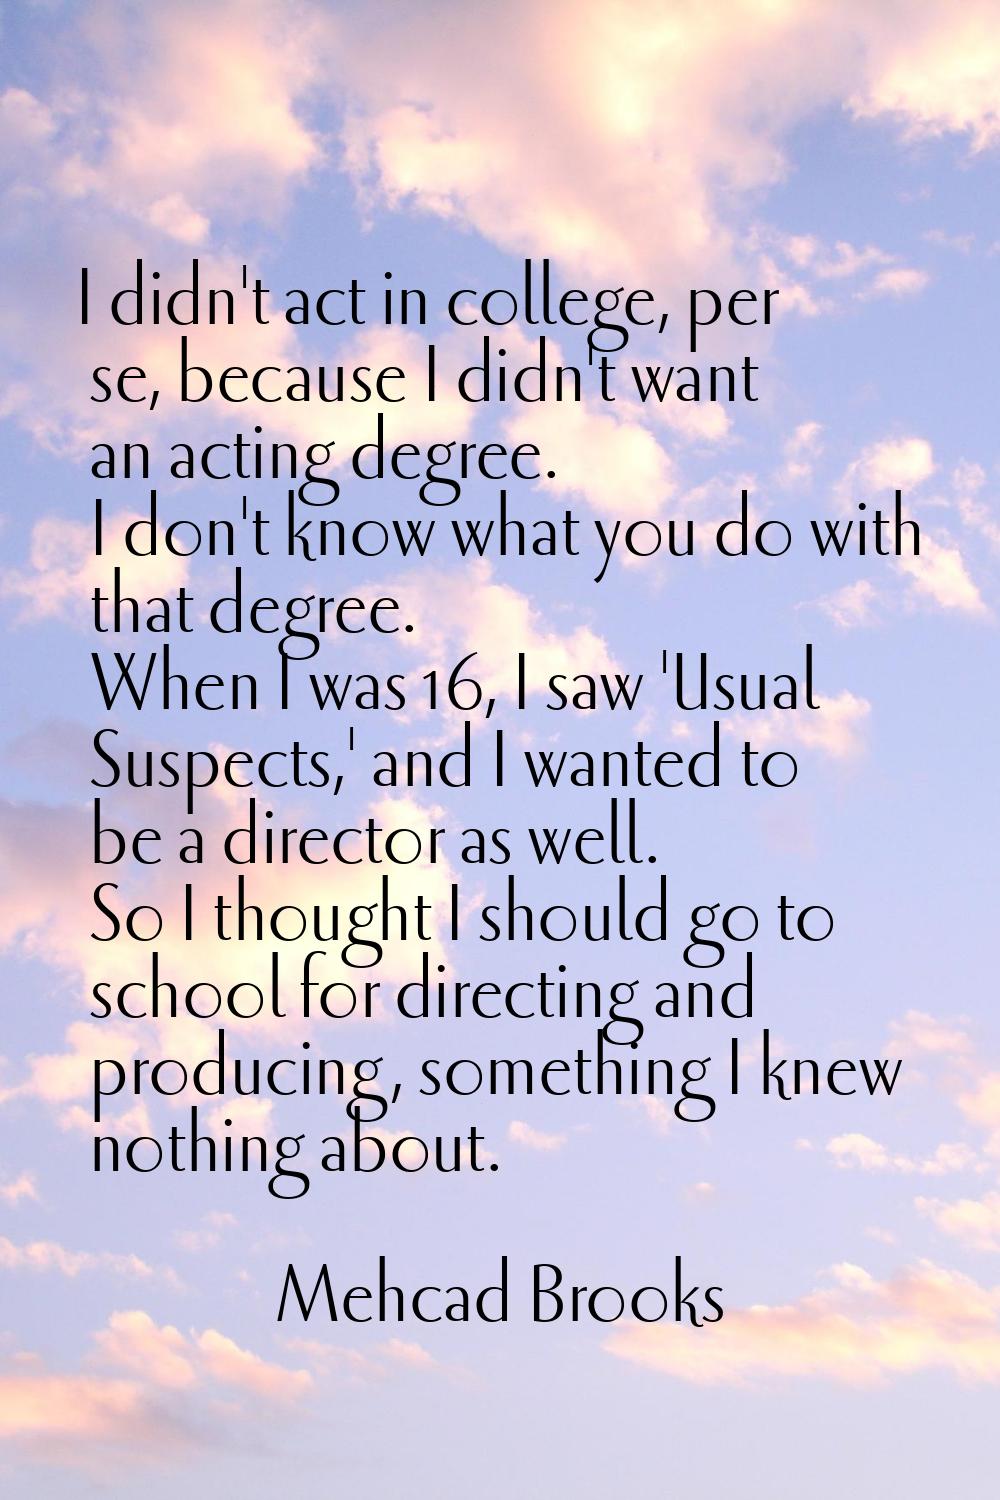 I didn't act in college, per se, because I didn't want an acting degree. I don't know what you do w